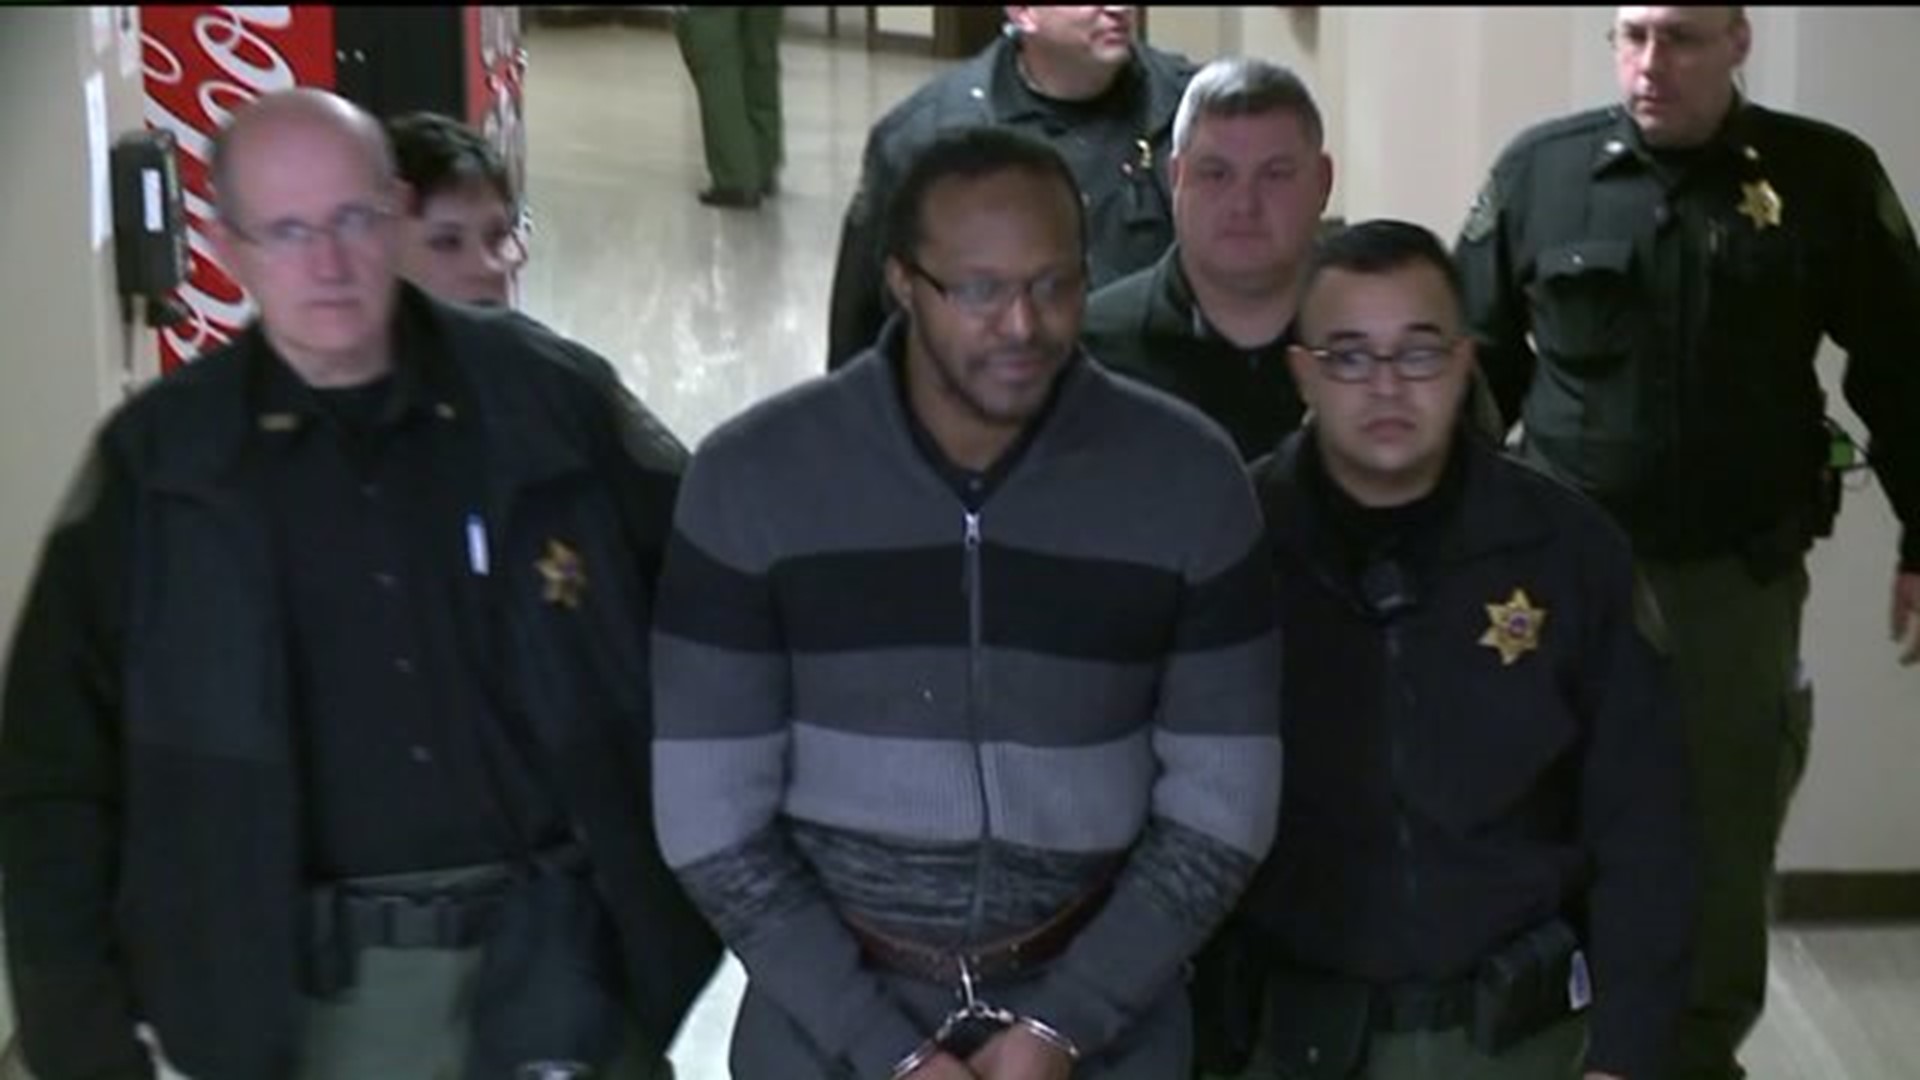 Jury Finds Yisrael Guilty in Luzerne County Murder Trial